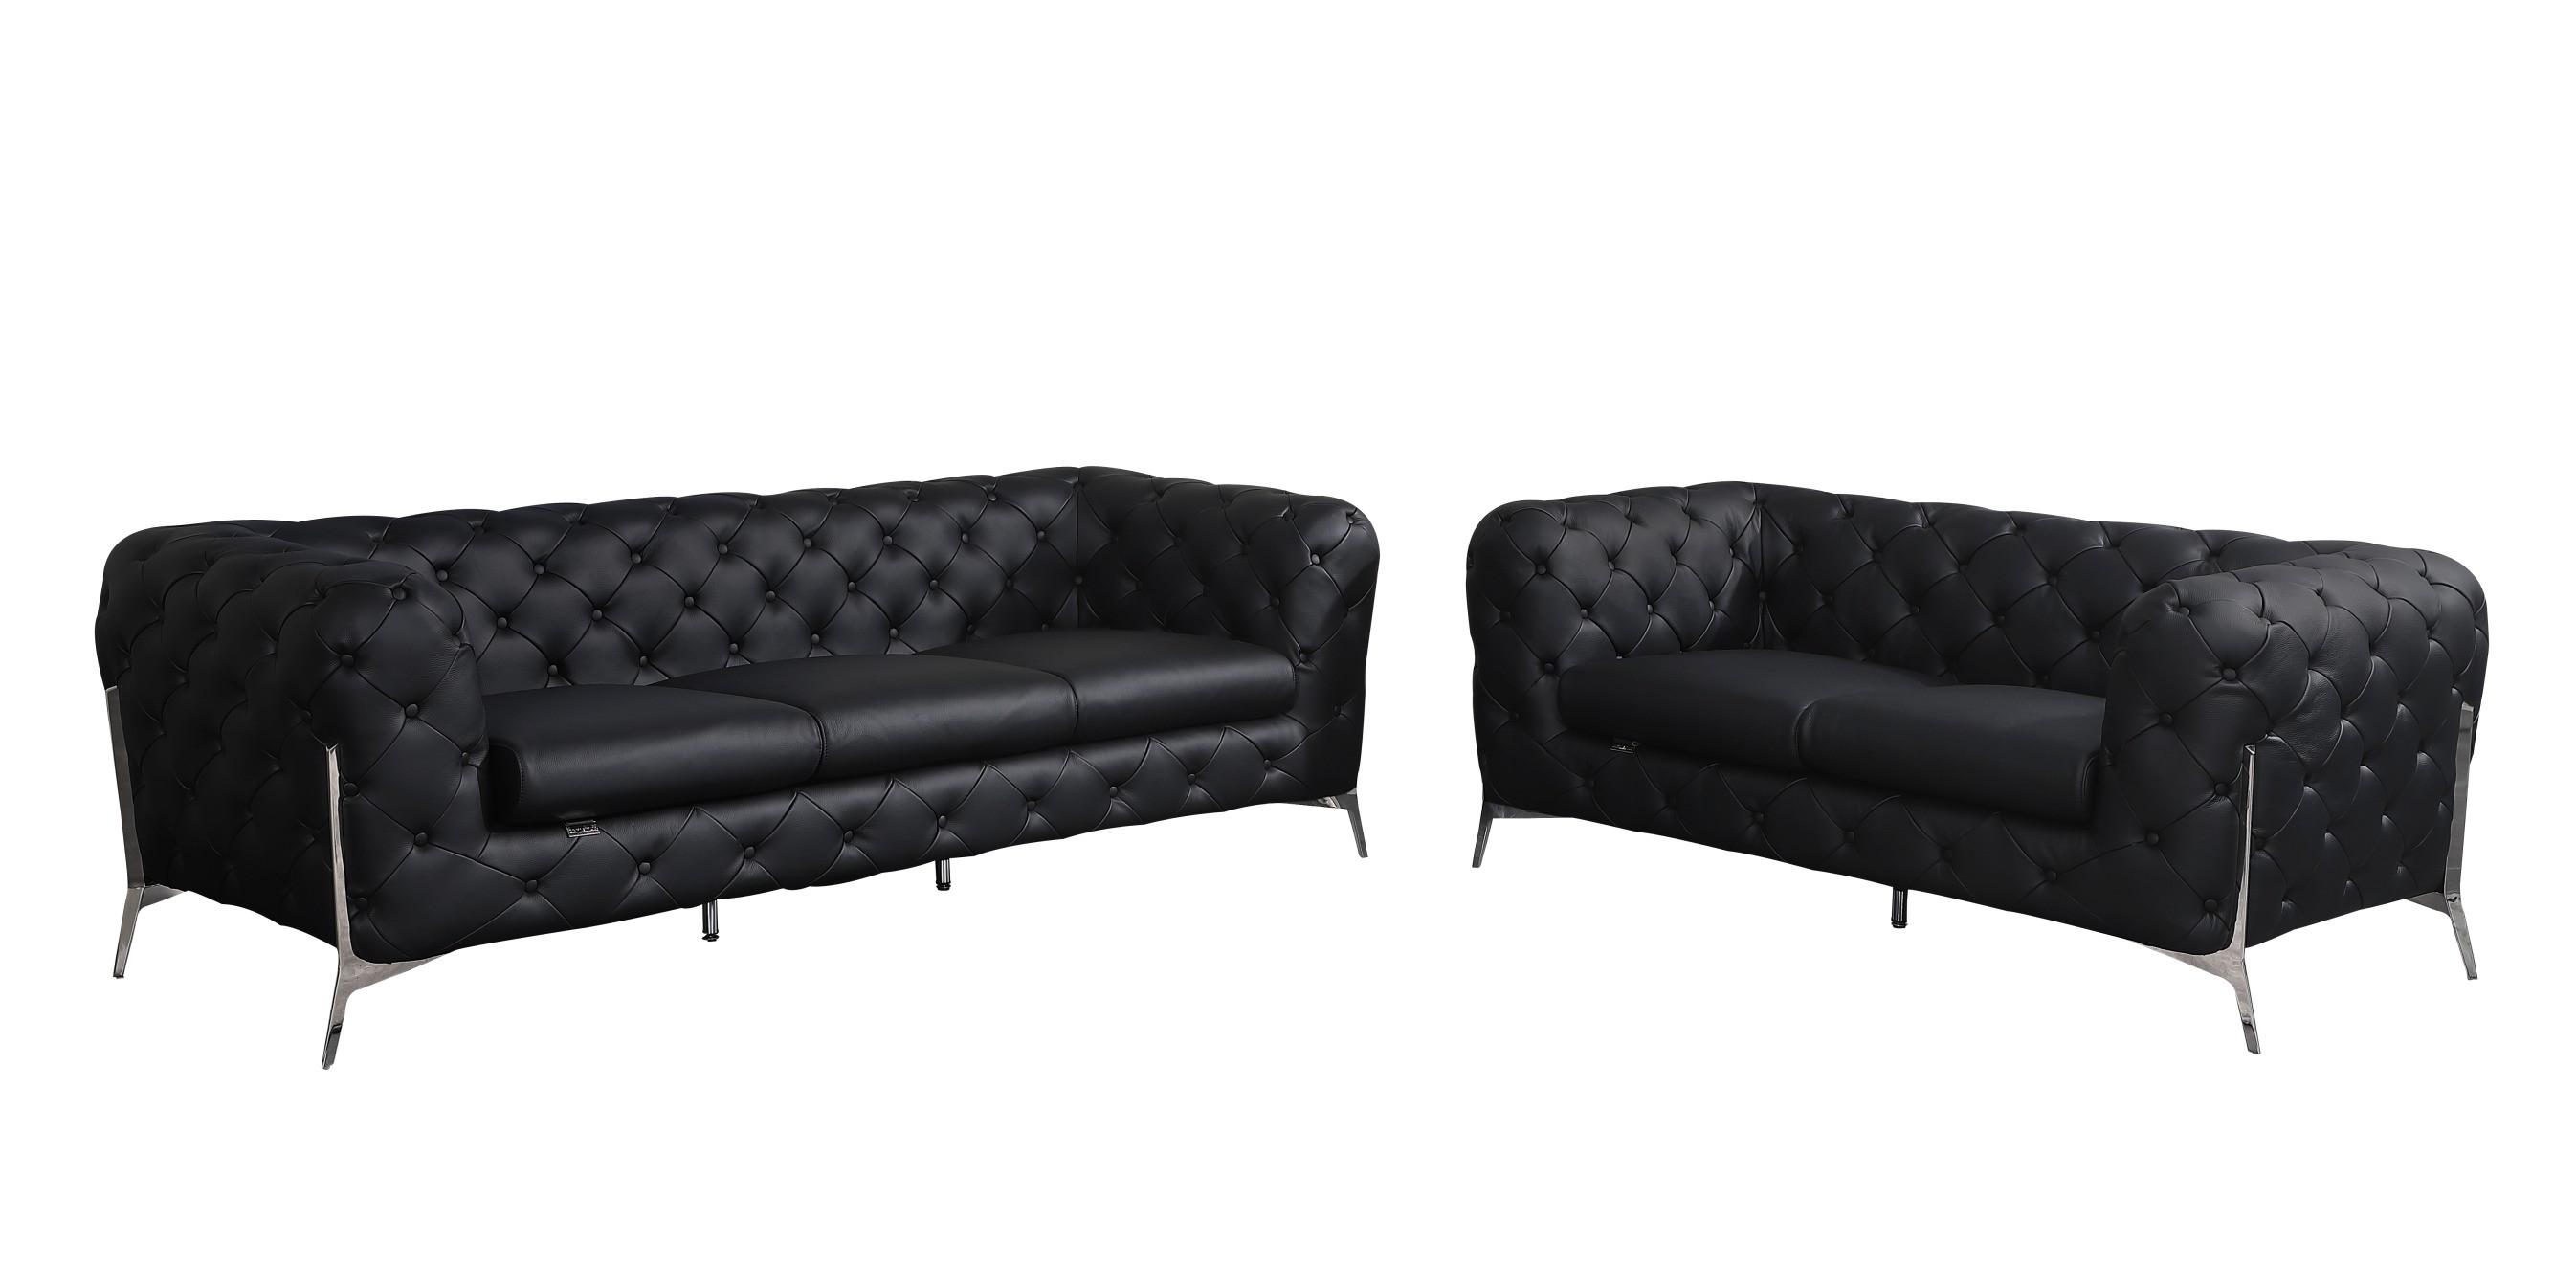 Contemporary Sofa and Loveseat Set 970 970-BLACK-2PC in Black Top grain leather